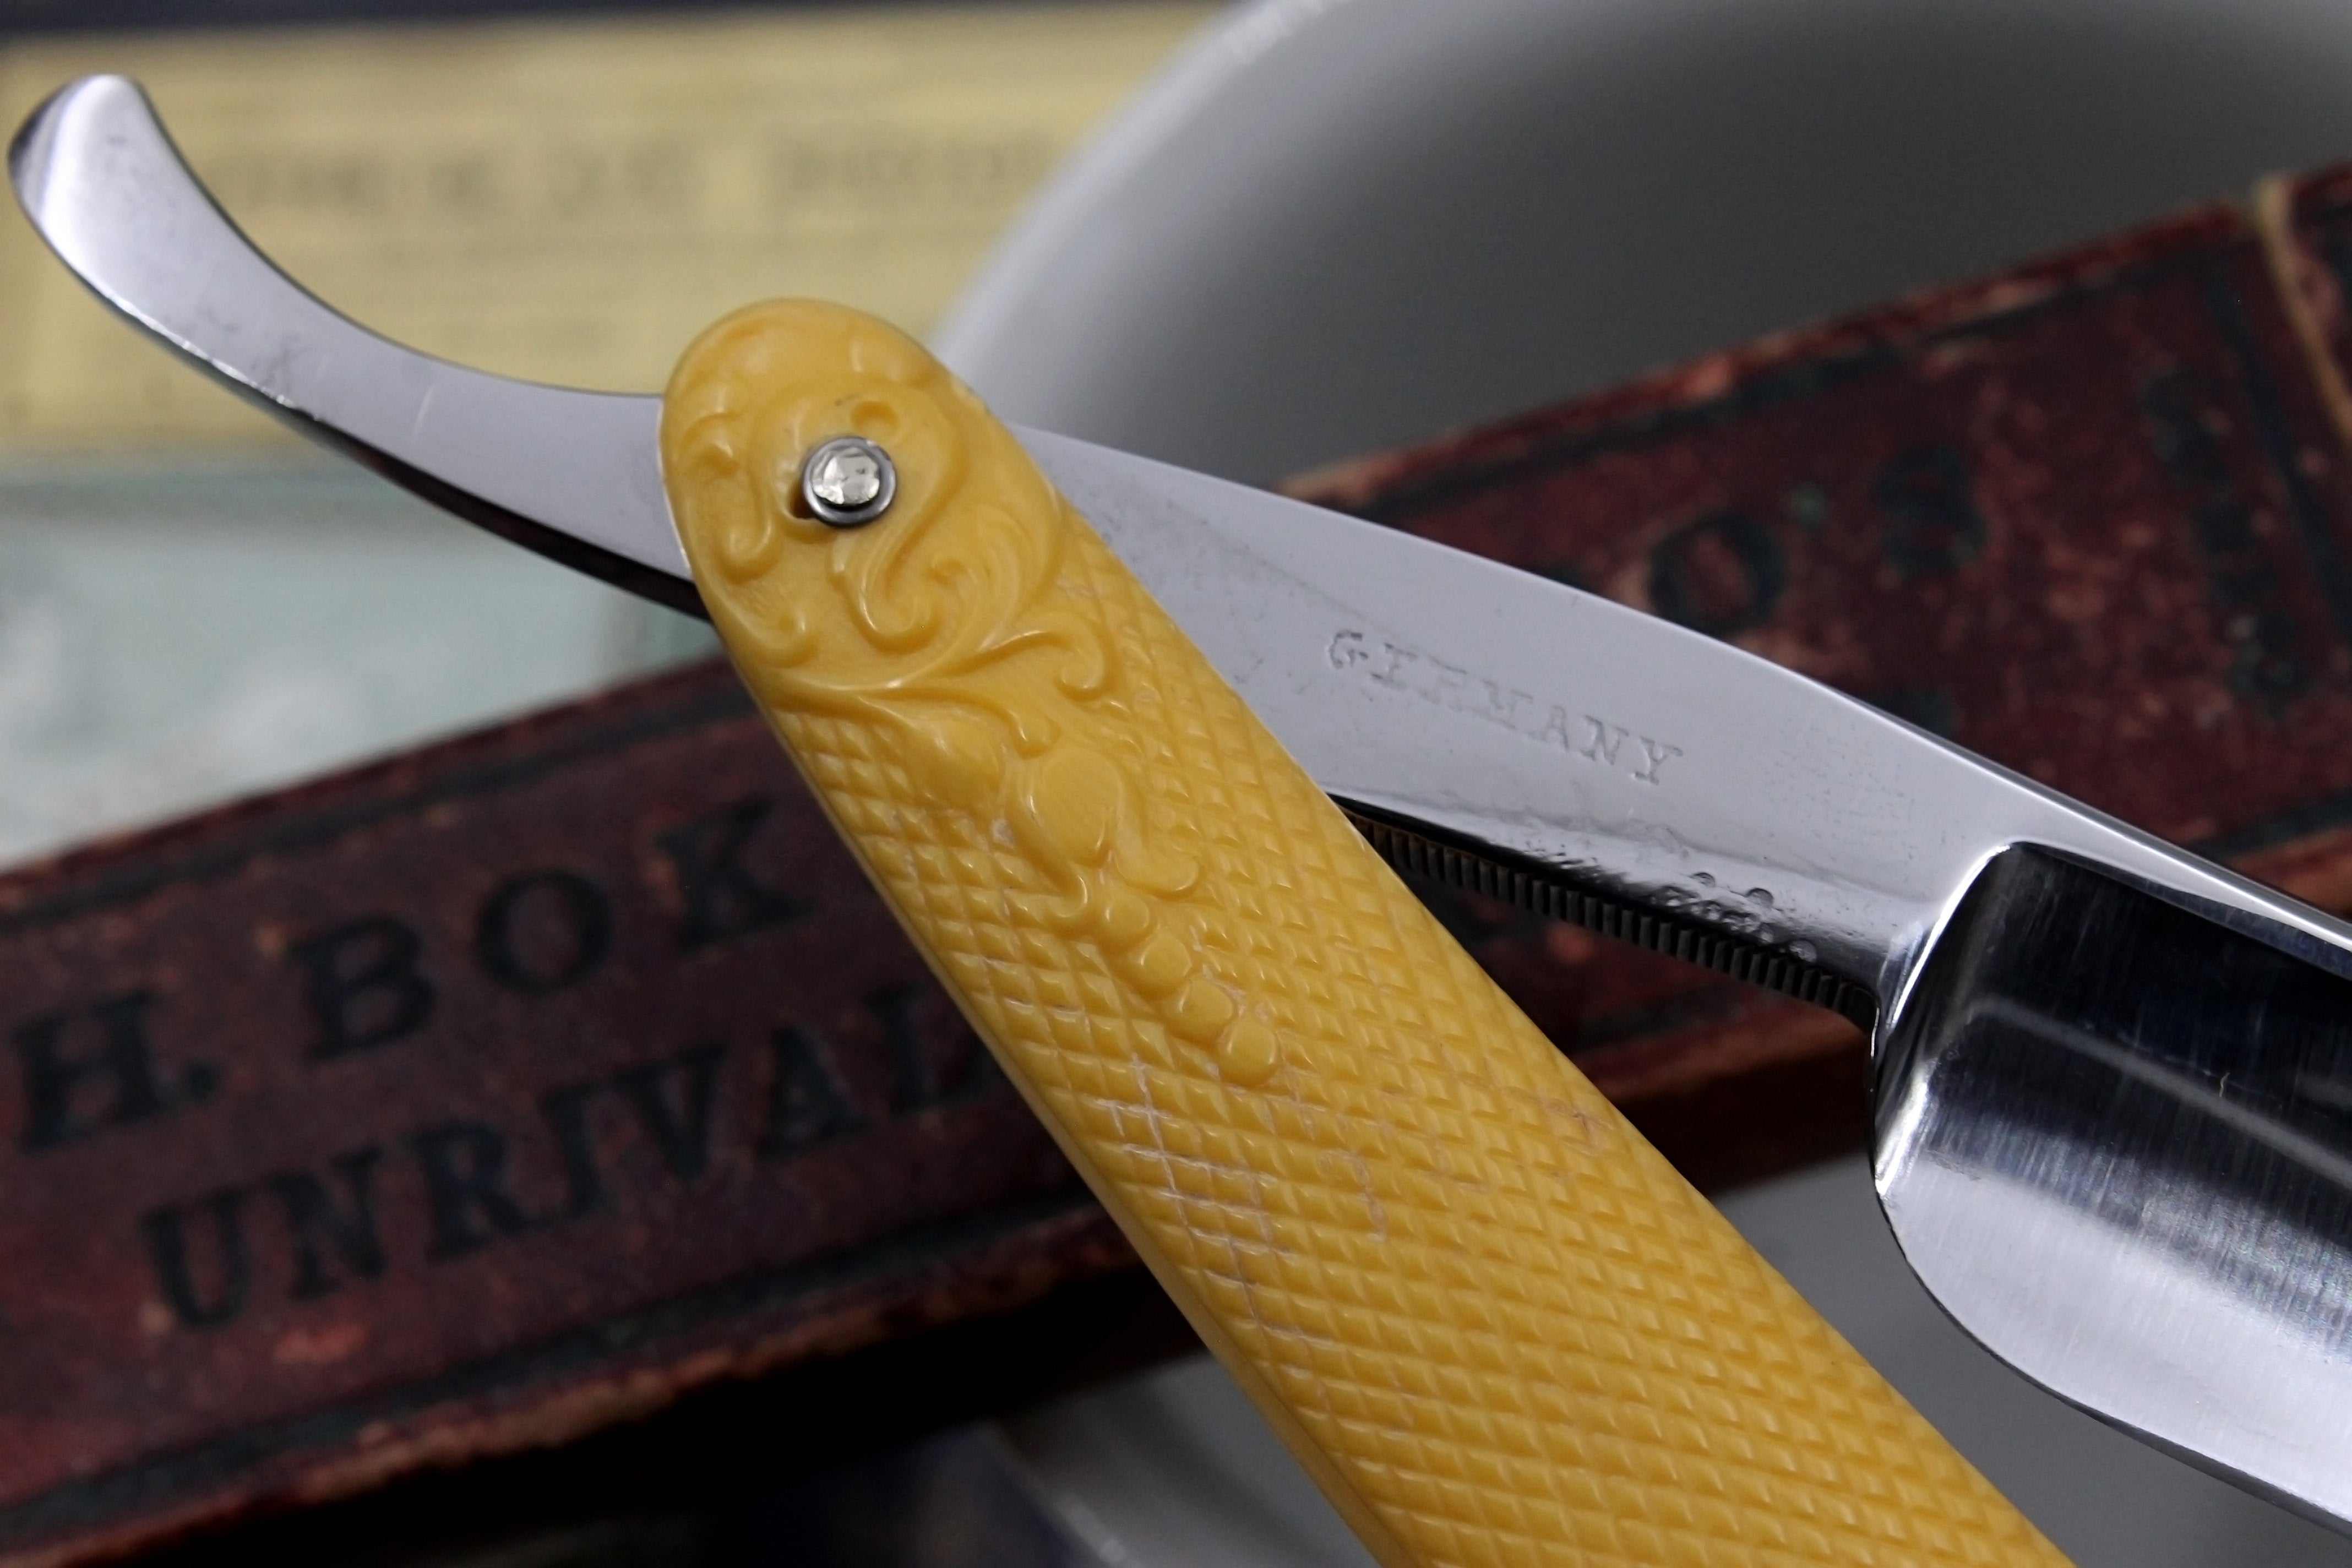 H. Boker & Co. Damascus Magnetic Steel - Gorgeous Fancy Scales 6/8 - German Vintage Straight Razor - Shave Ready